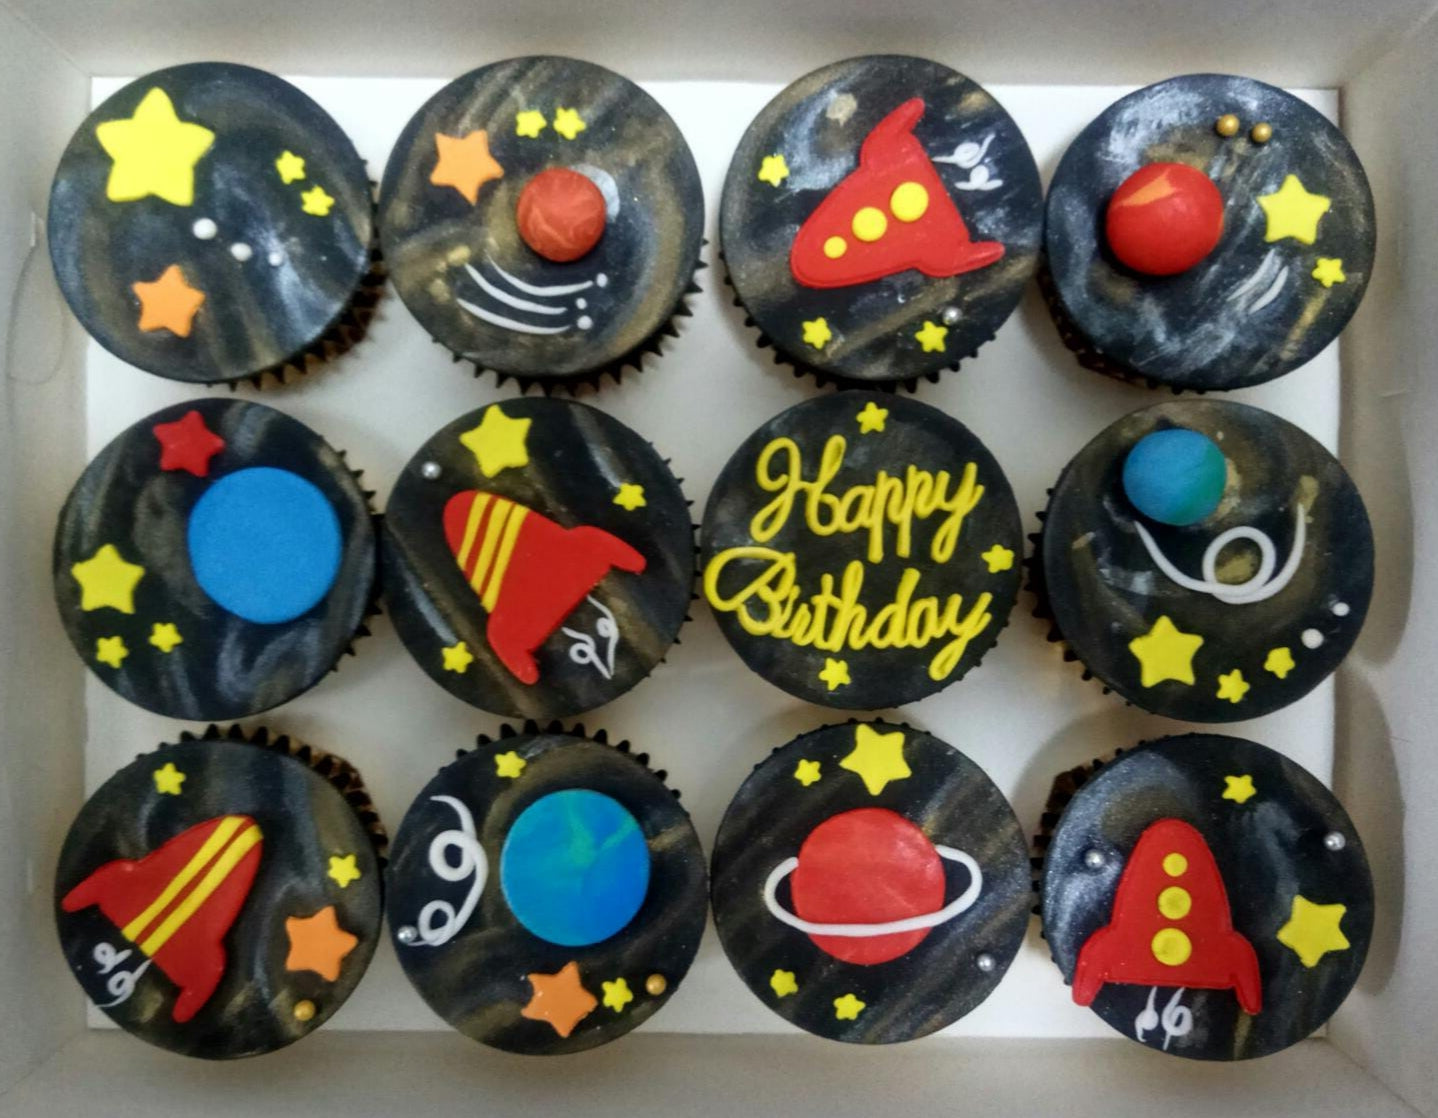 Galaxy Cupcakes (Box of 12) - Cuppacakes - Singapore's Very Own Cupcakes Shop